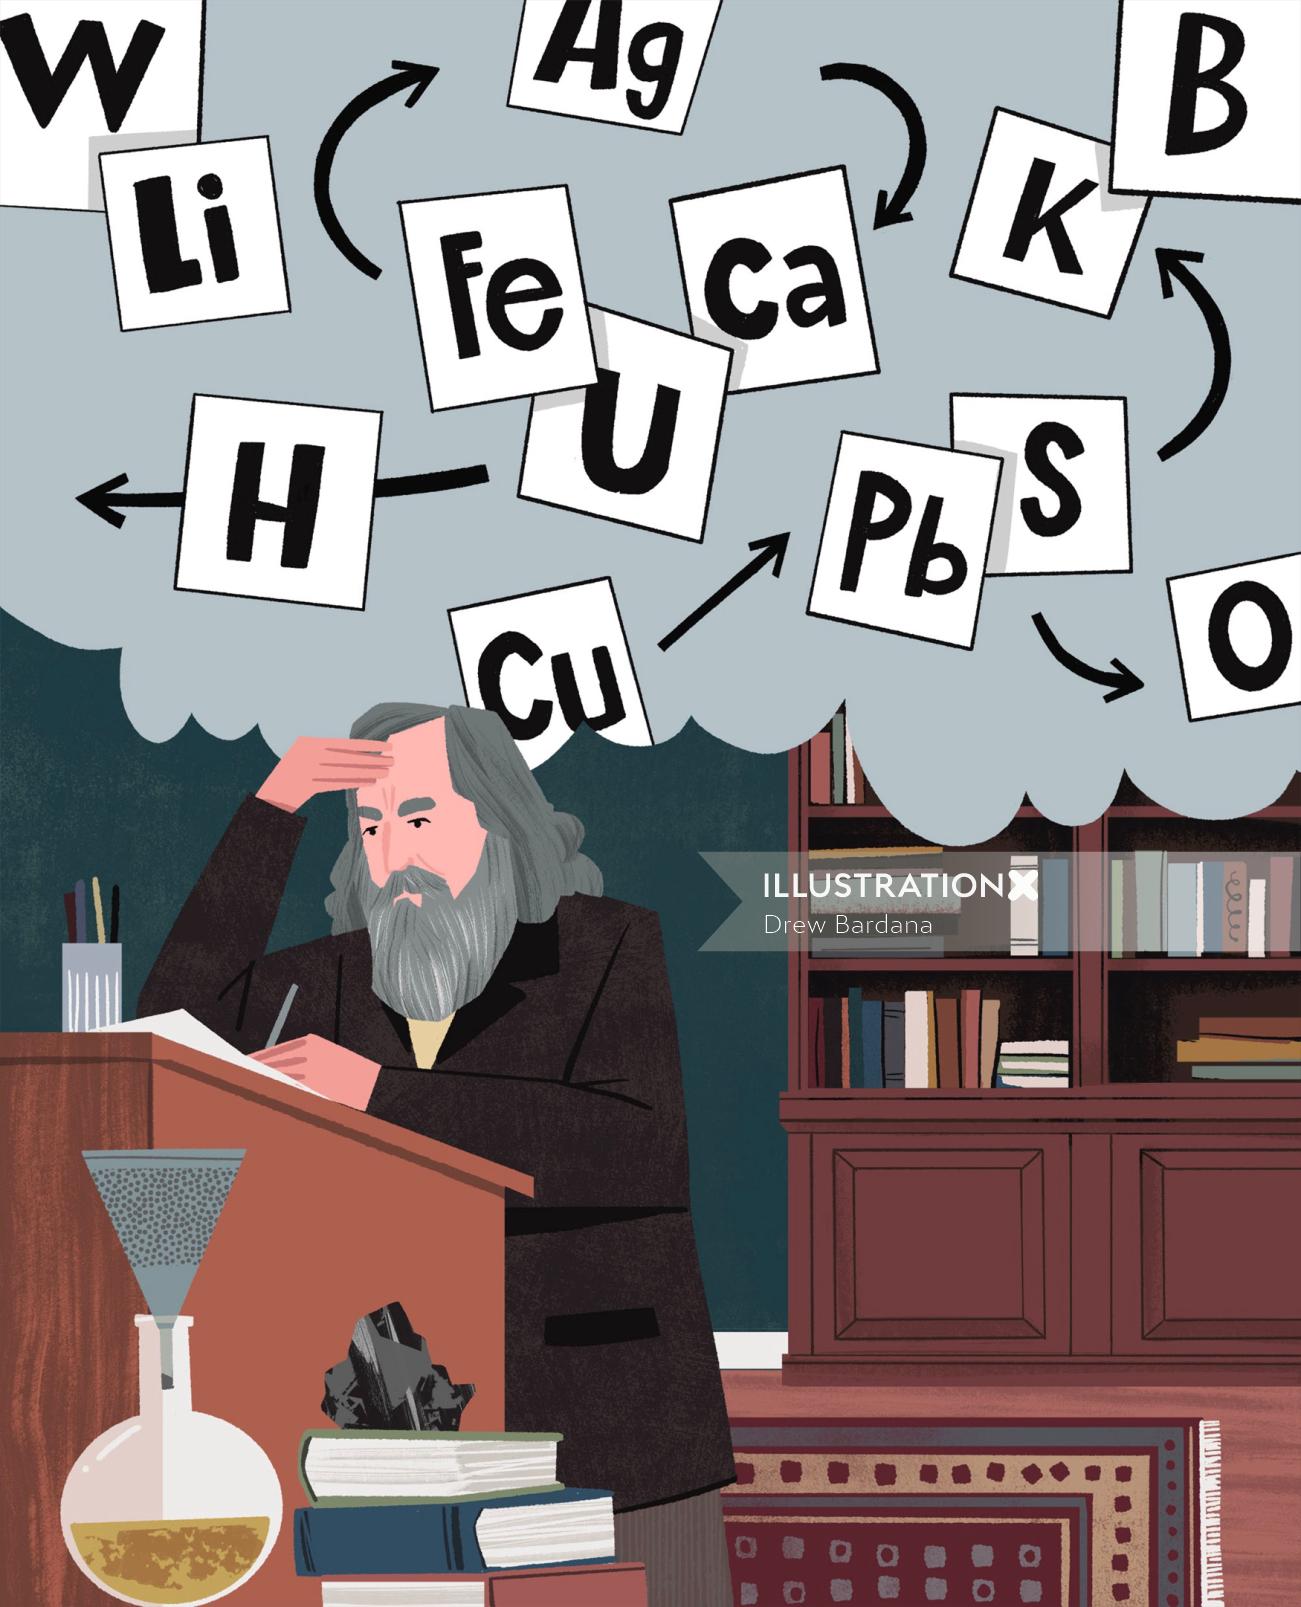 People Dmitri Mendeleev and the Periodic Table
